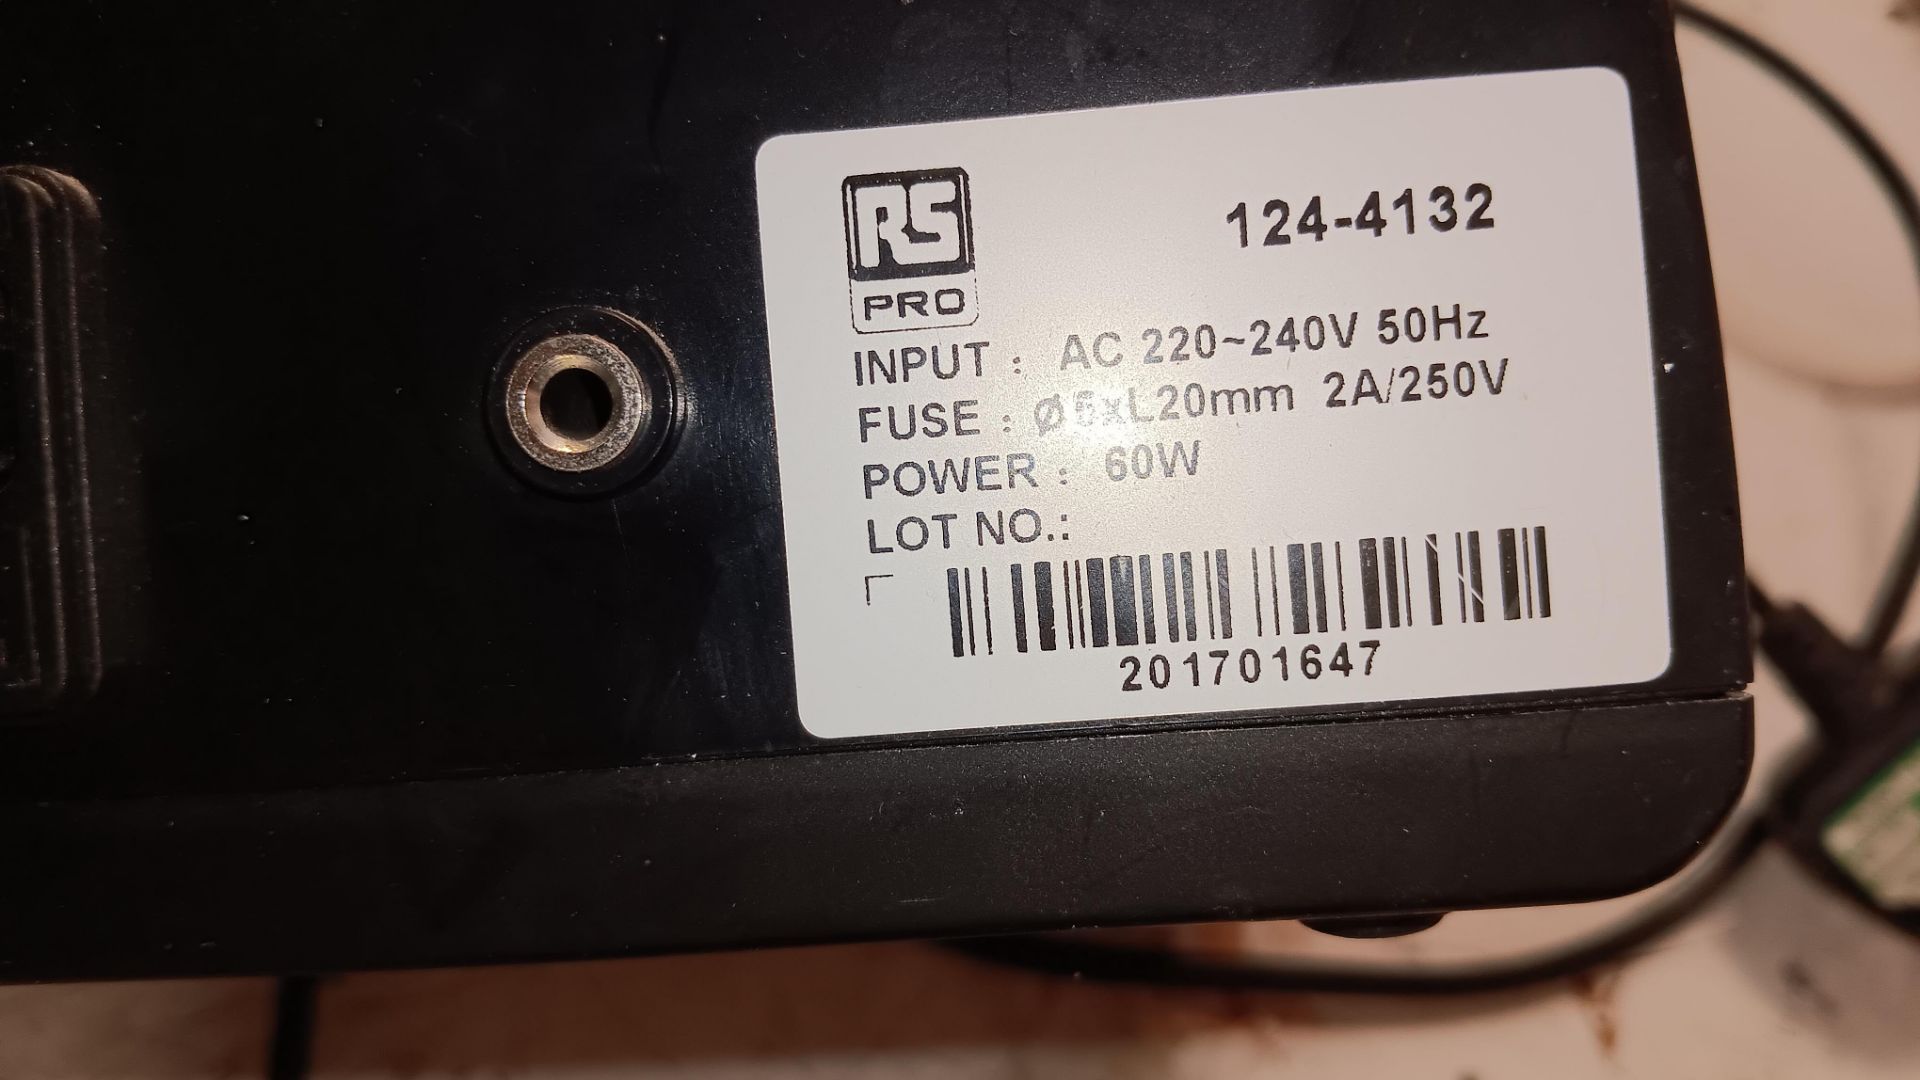 RS Pro 1244132 60w soldering station, serial number 201701647, 240v – Located in Unit 3 - Image 2 of 2